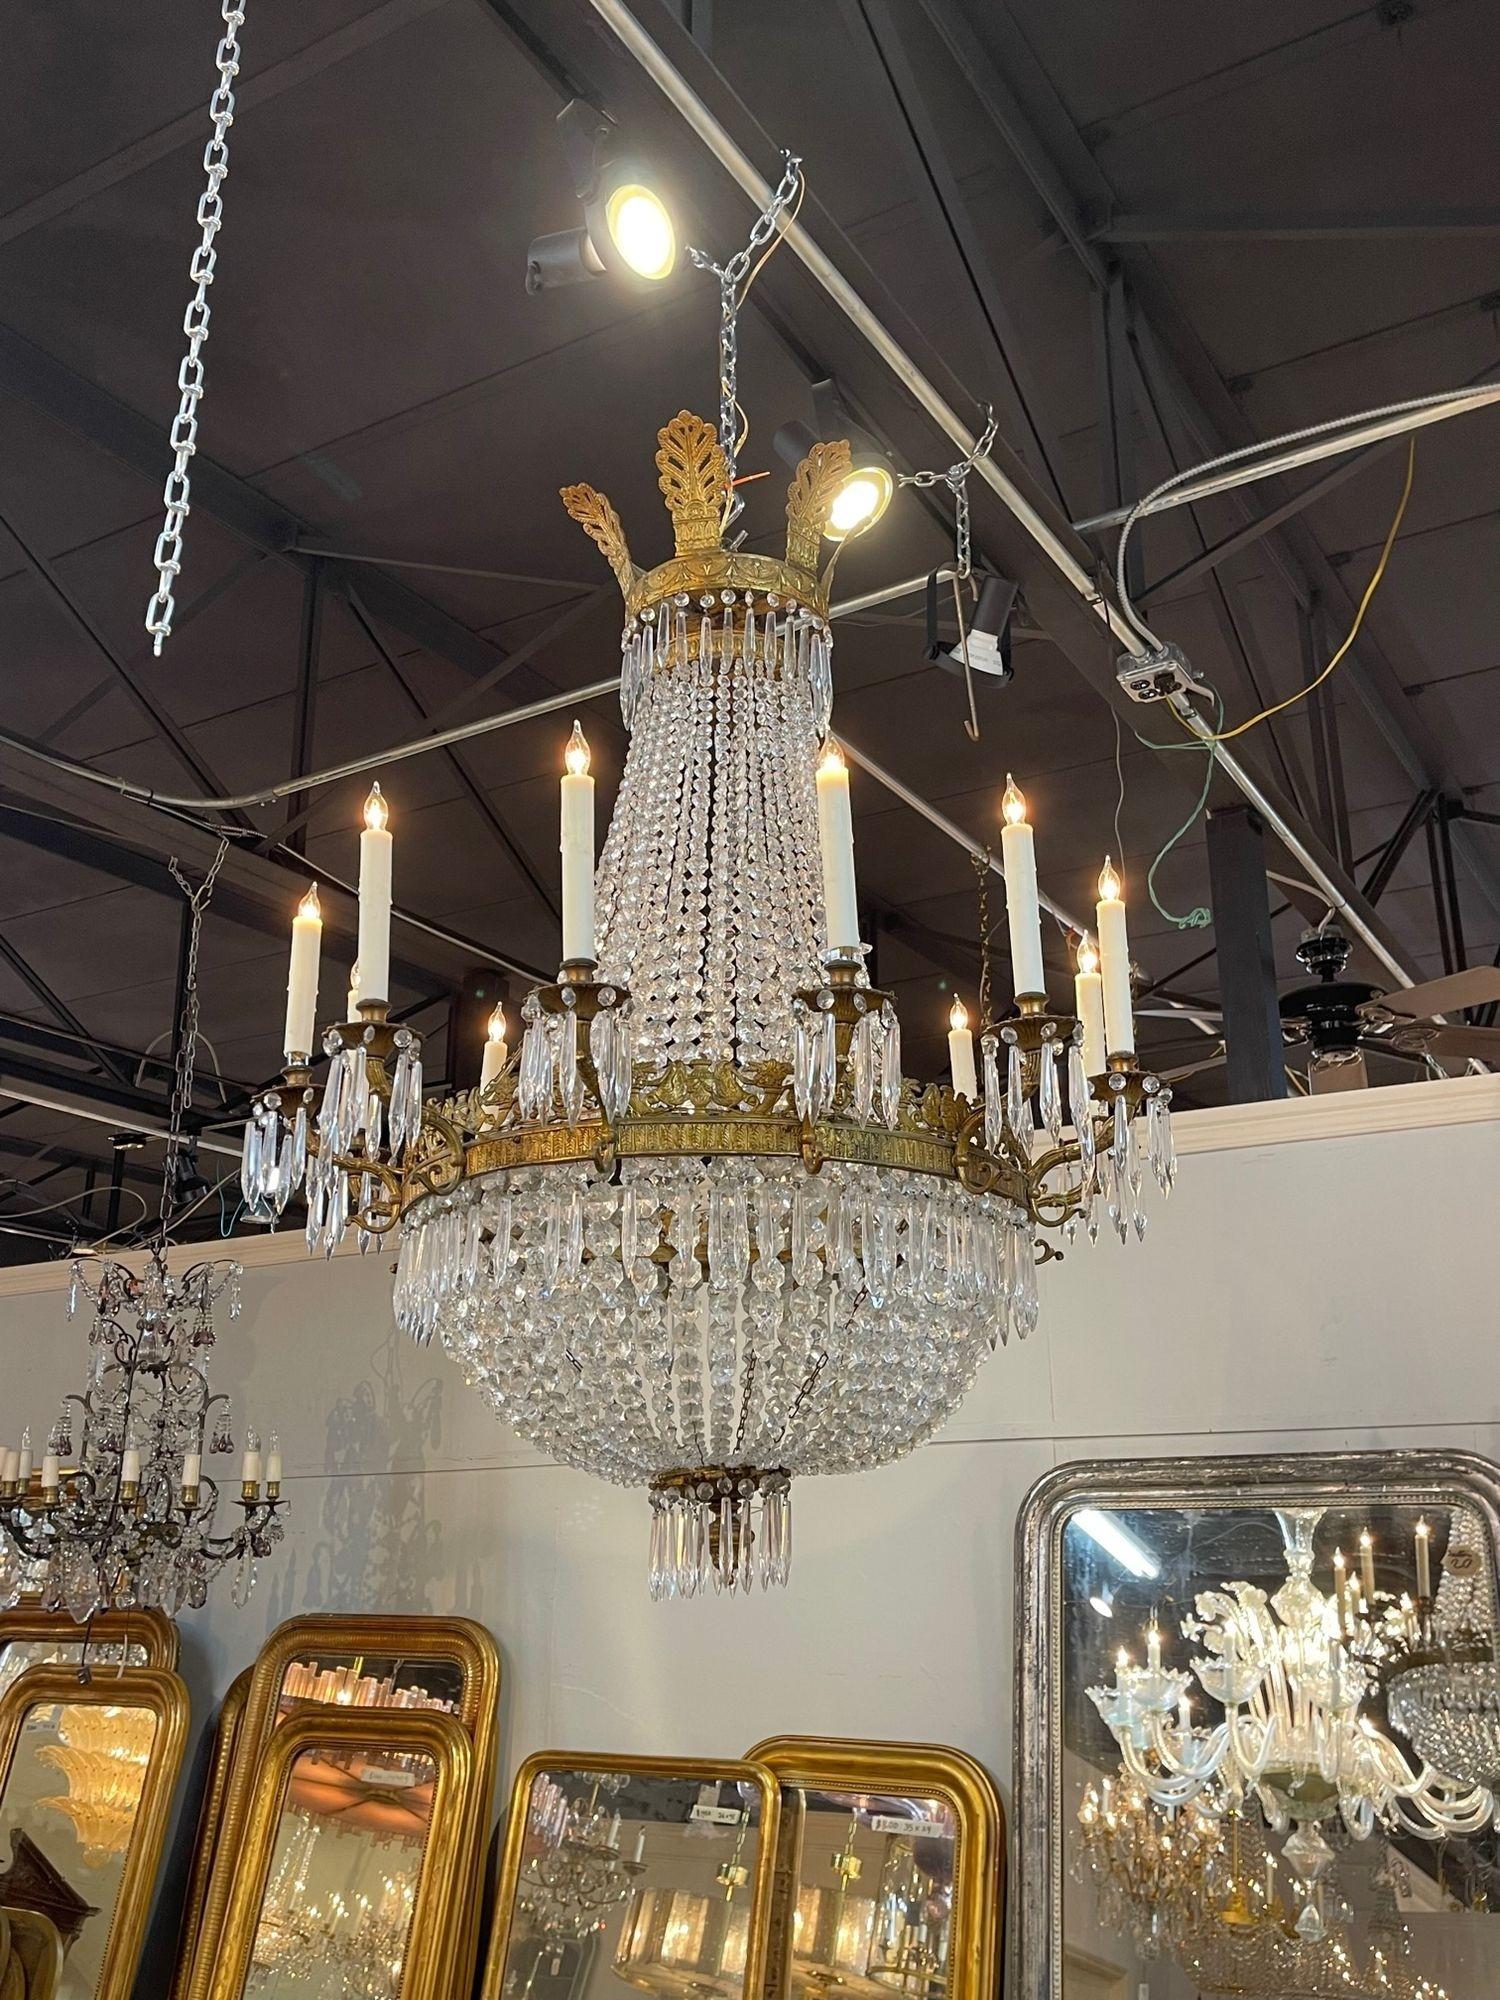 Exceptional 19th century French Empire gilt bronze and crystal basket form chandelier with 12 lights. Take notice of the very fine bronze details including decorative leaves and urns. And the shimmering crystals are gorgeous! An impressive piece!